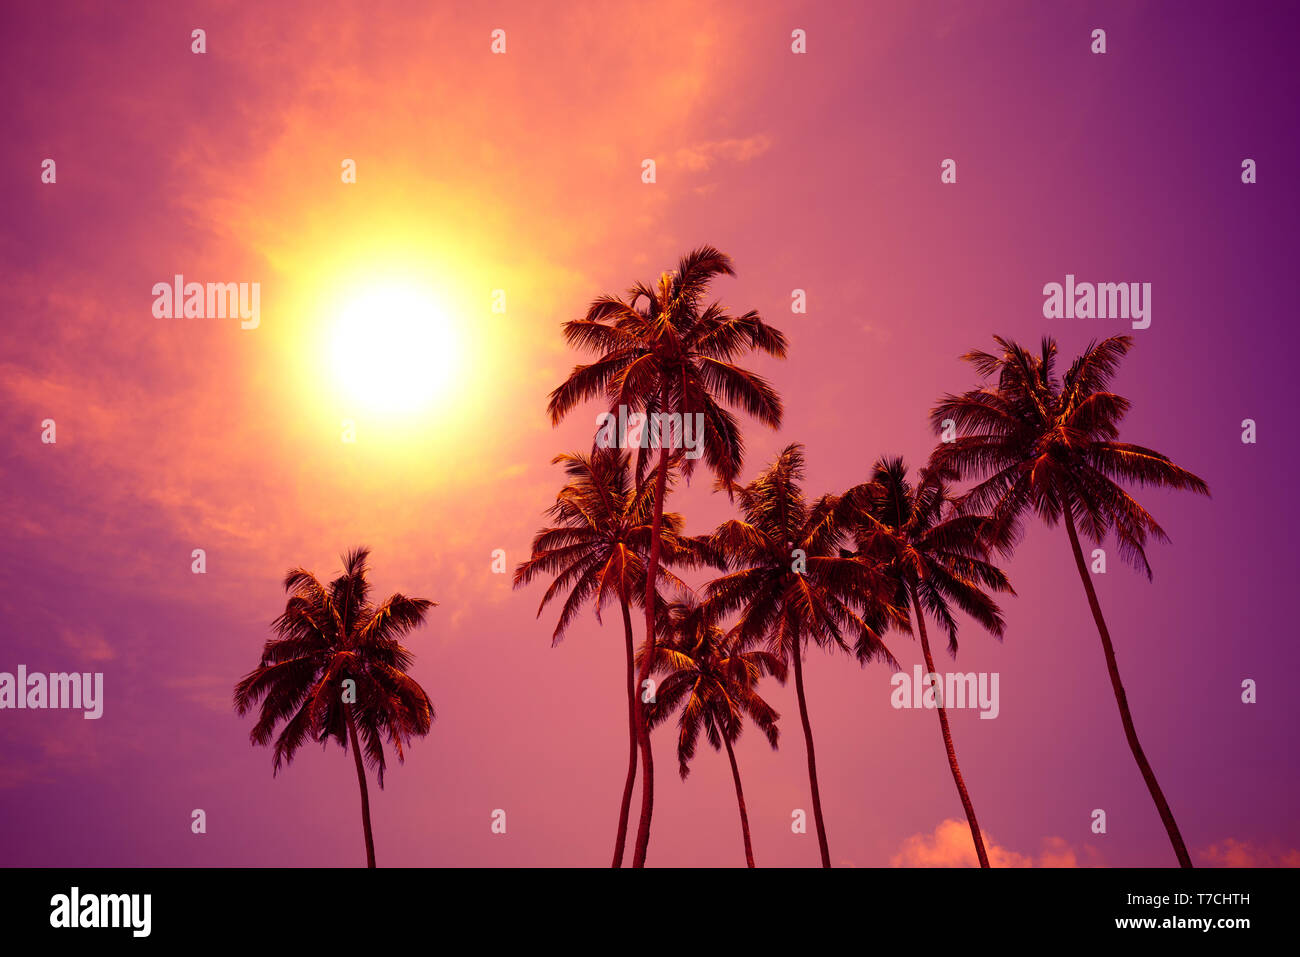 Palm trees at vivid sunset with colorful sky and shining sun circle Stock Photo